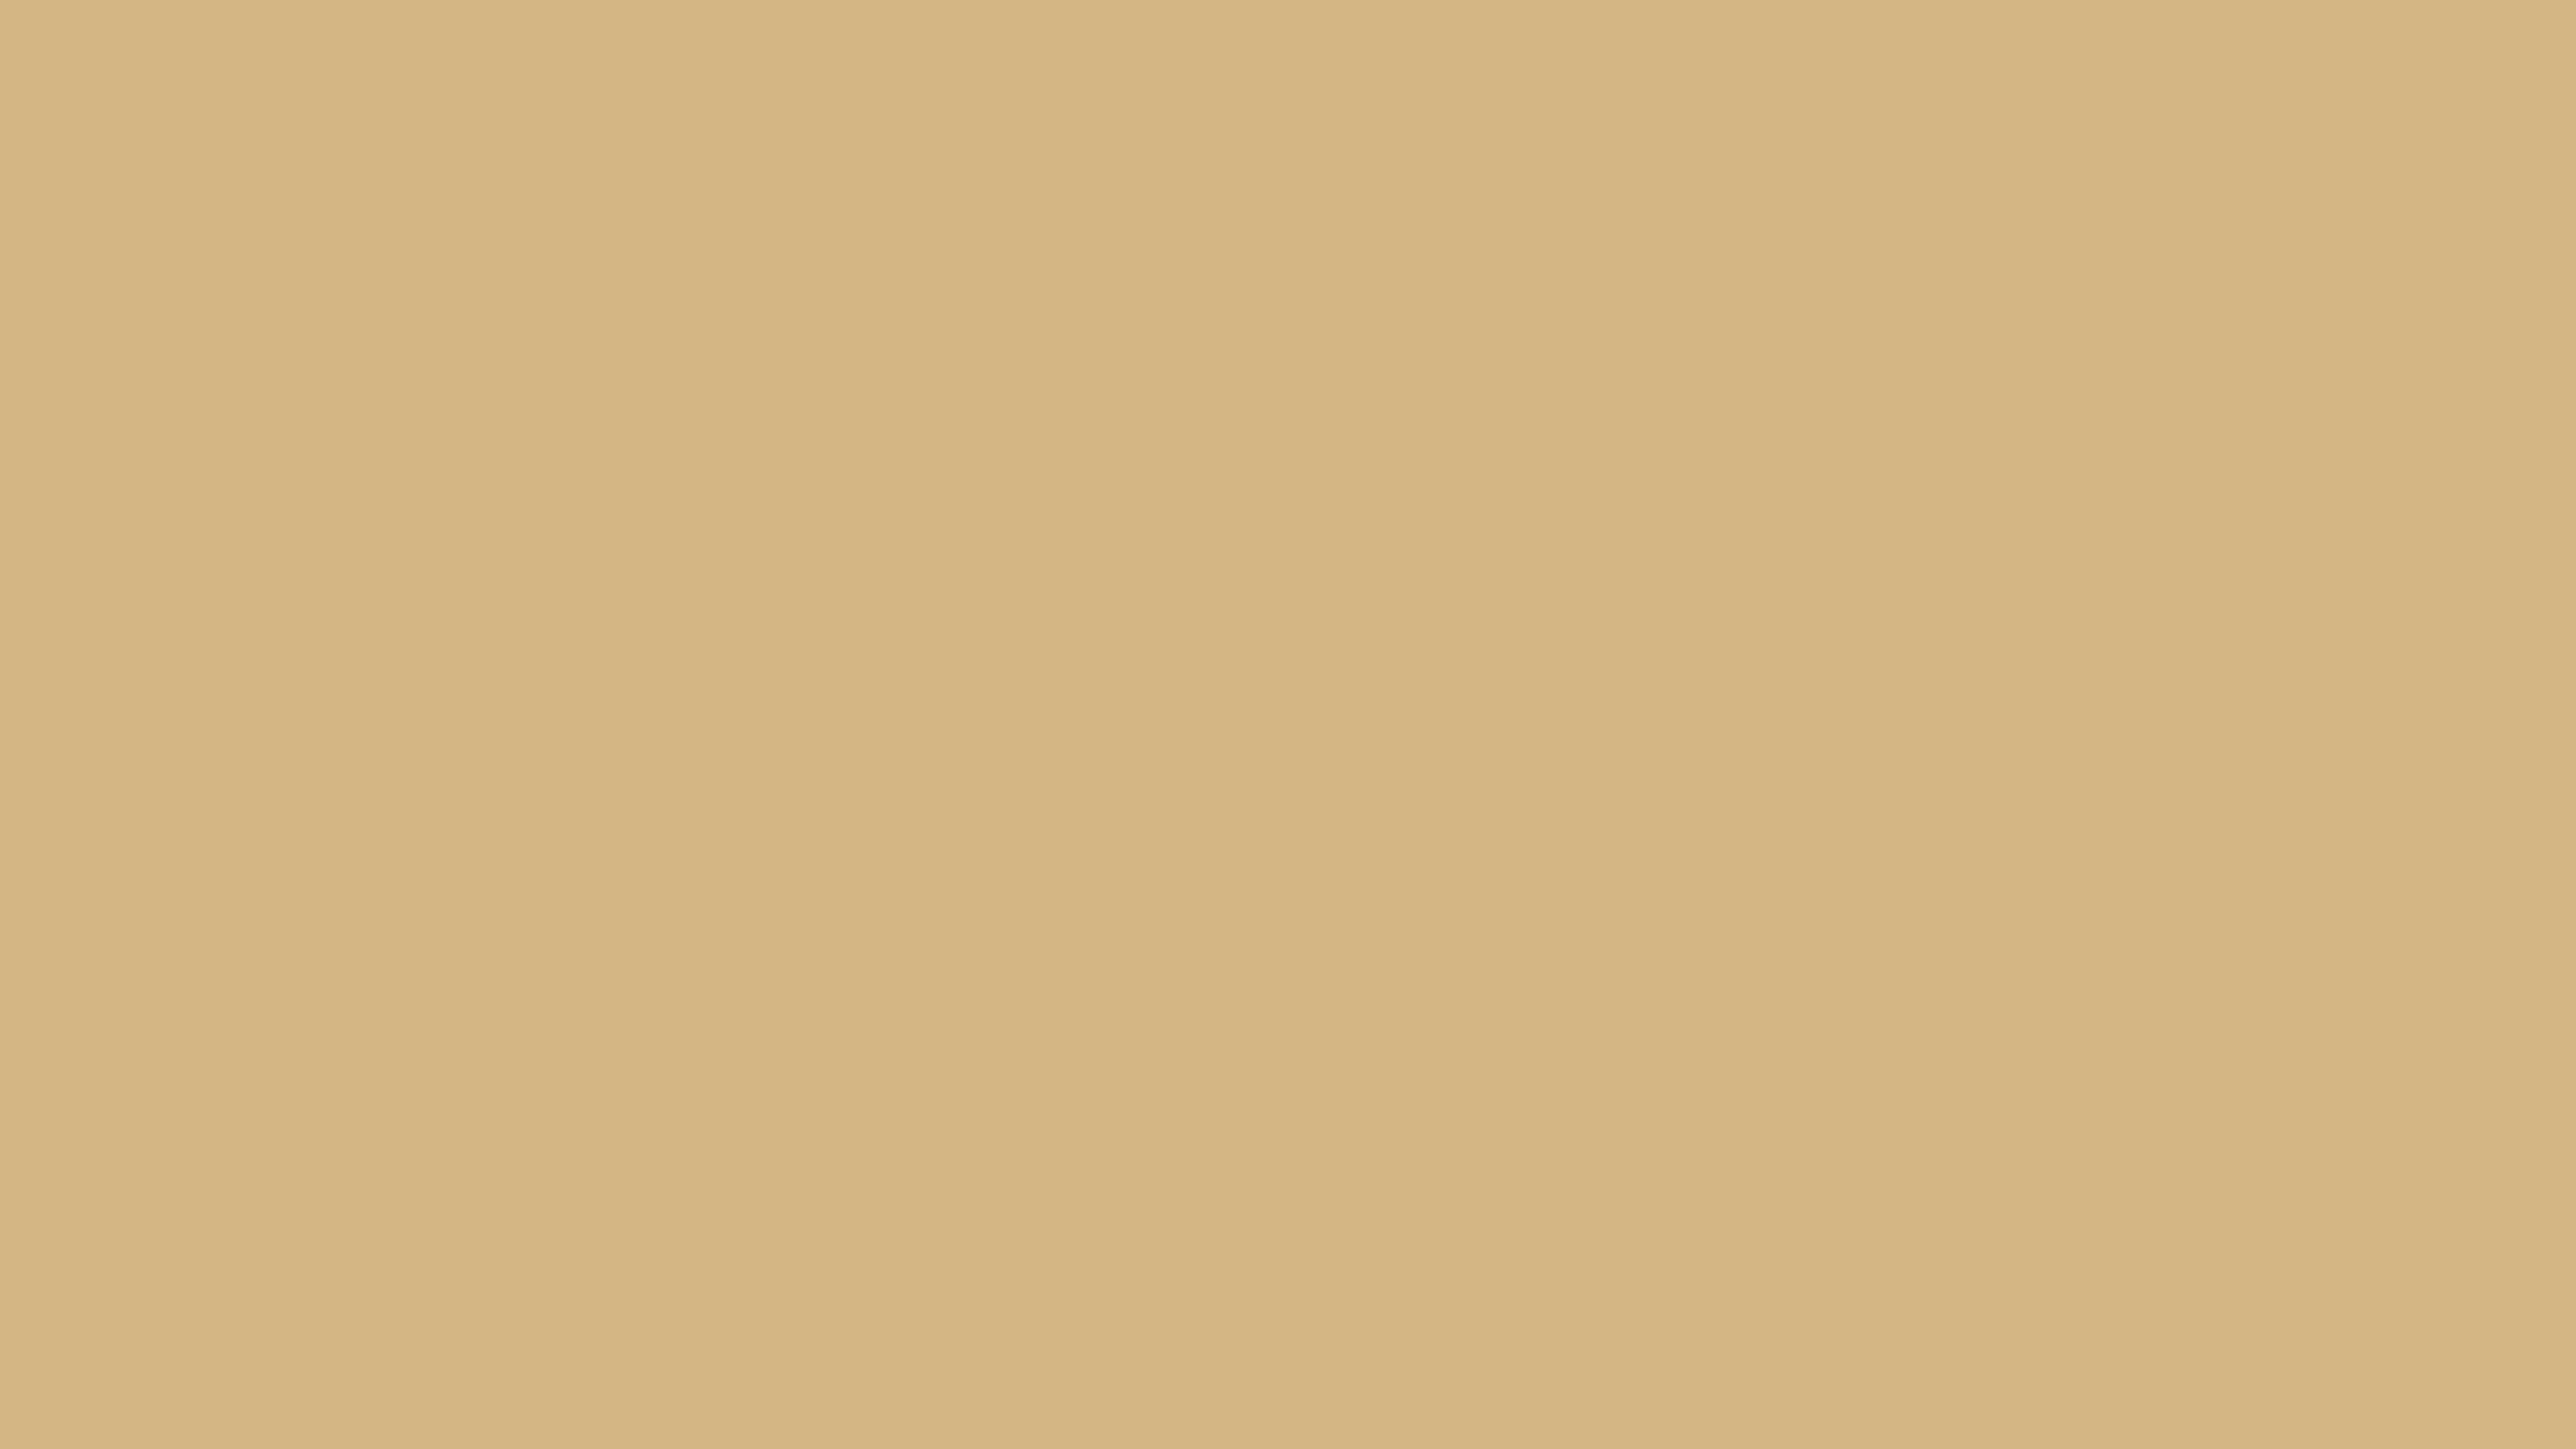 Very Light Brown Solid Color Background Image | Free Image Generator